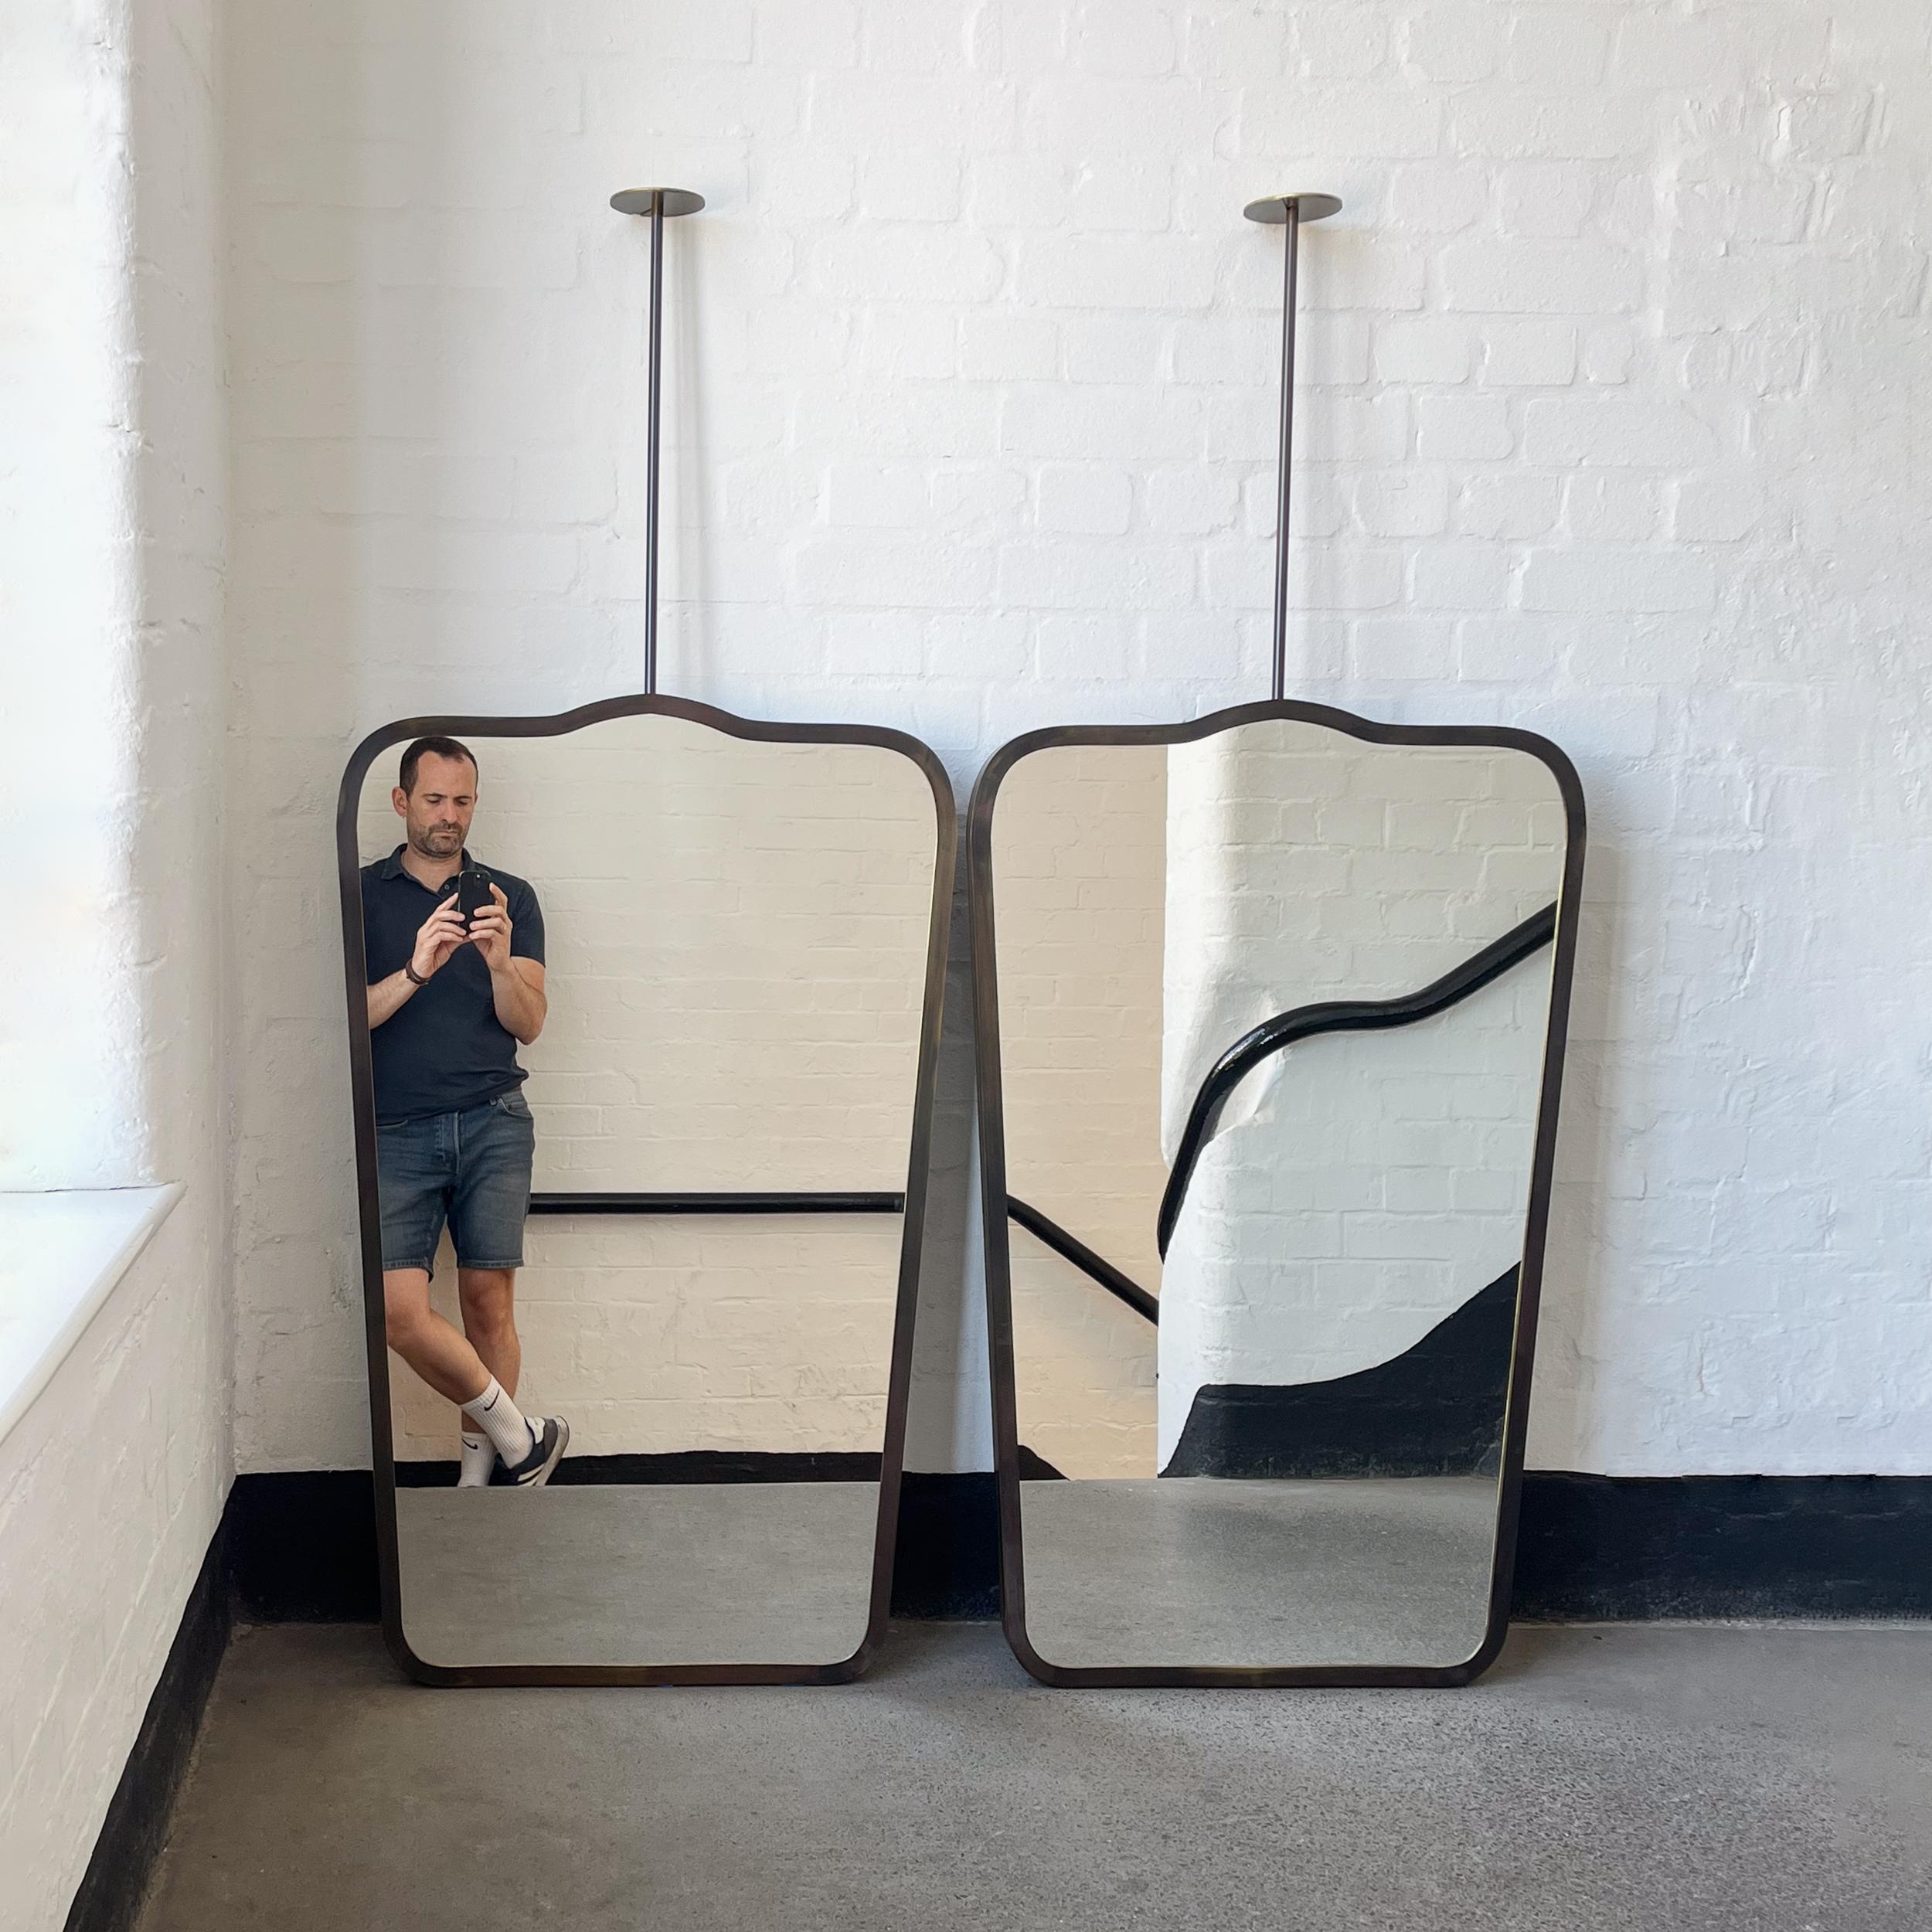 hanging mirrors from ceiling